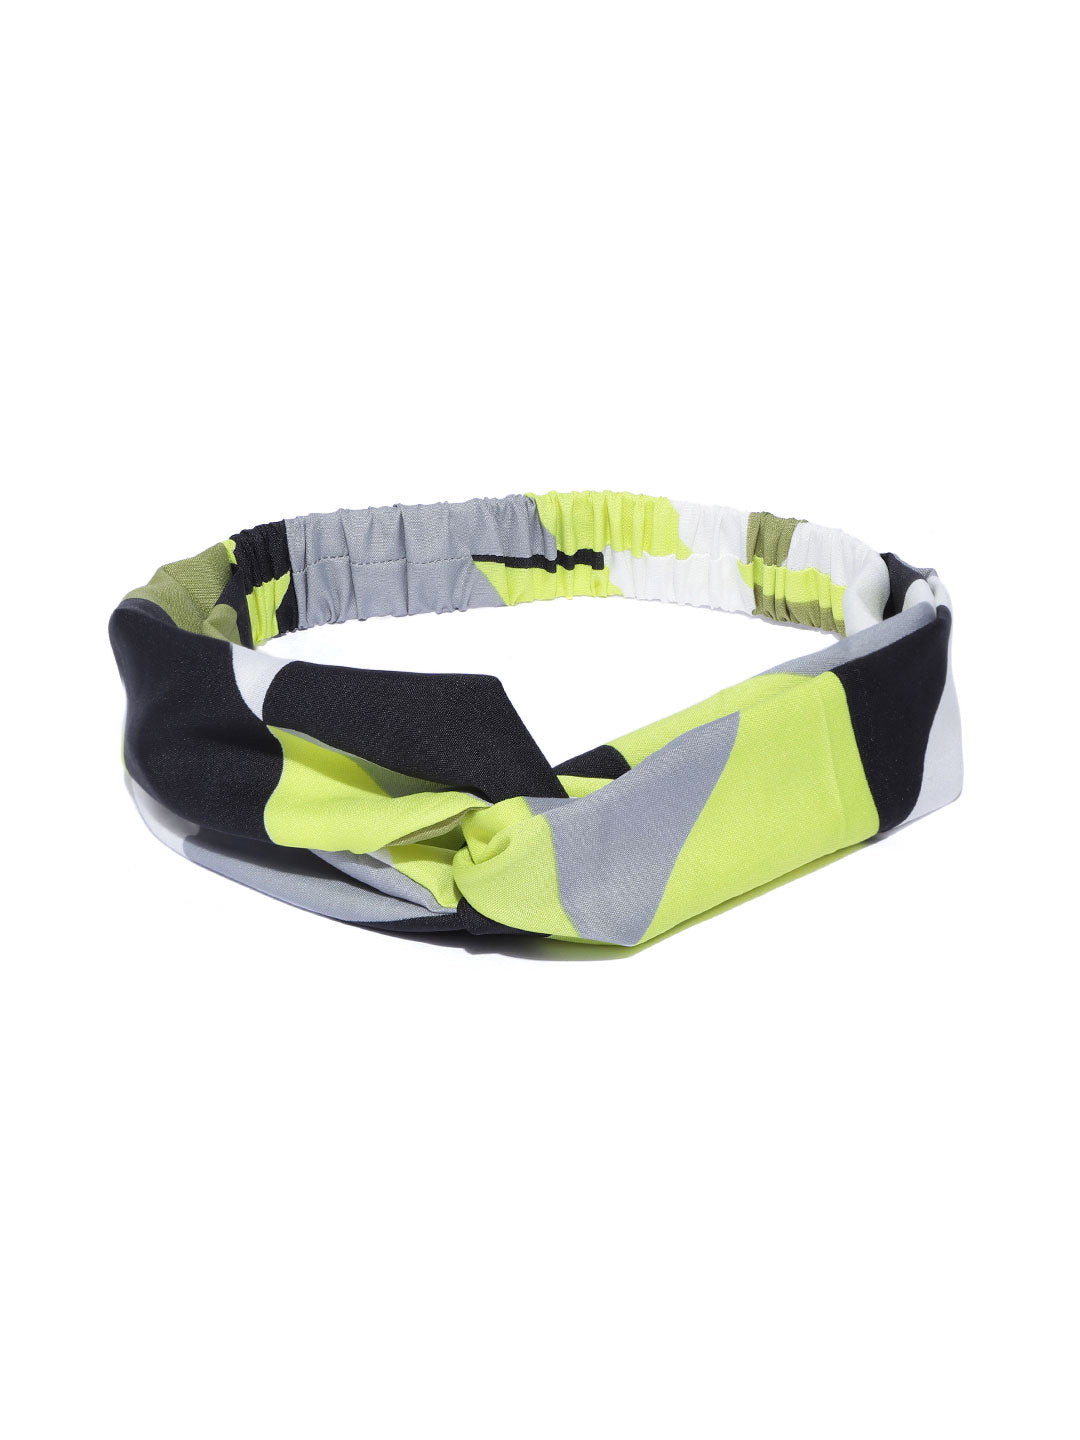 Blueberry lime green and black printed knot hairband